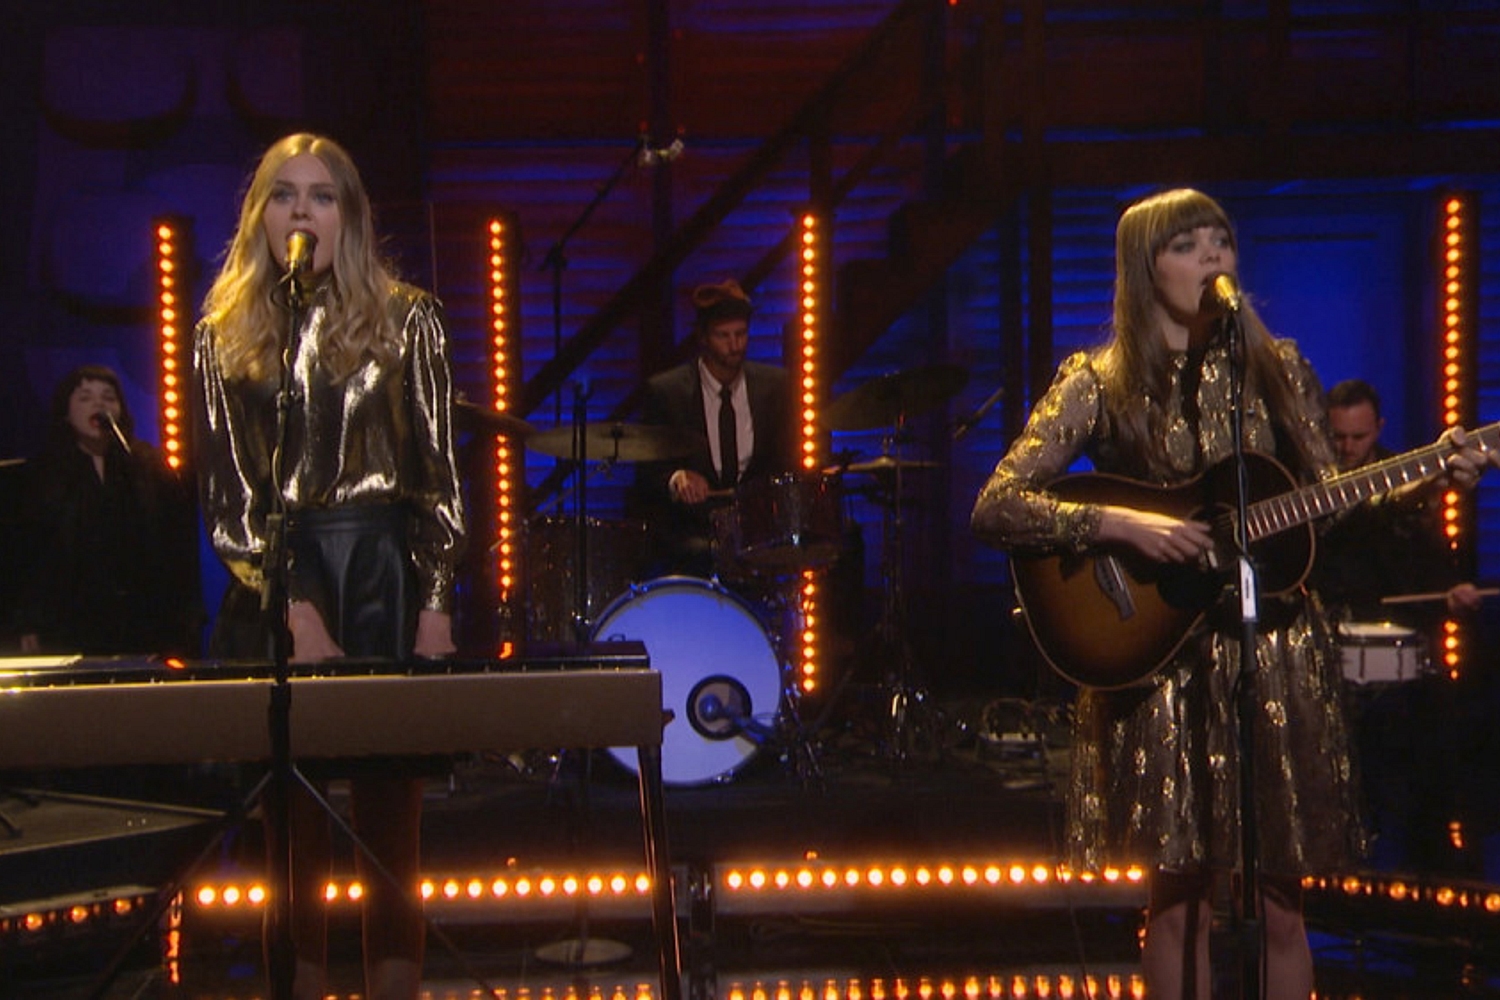 Watch First Aid Kit bring ‘Stay Gold’ to Conan